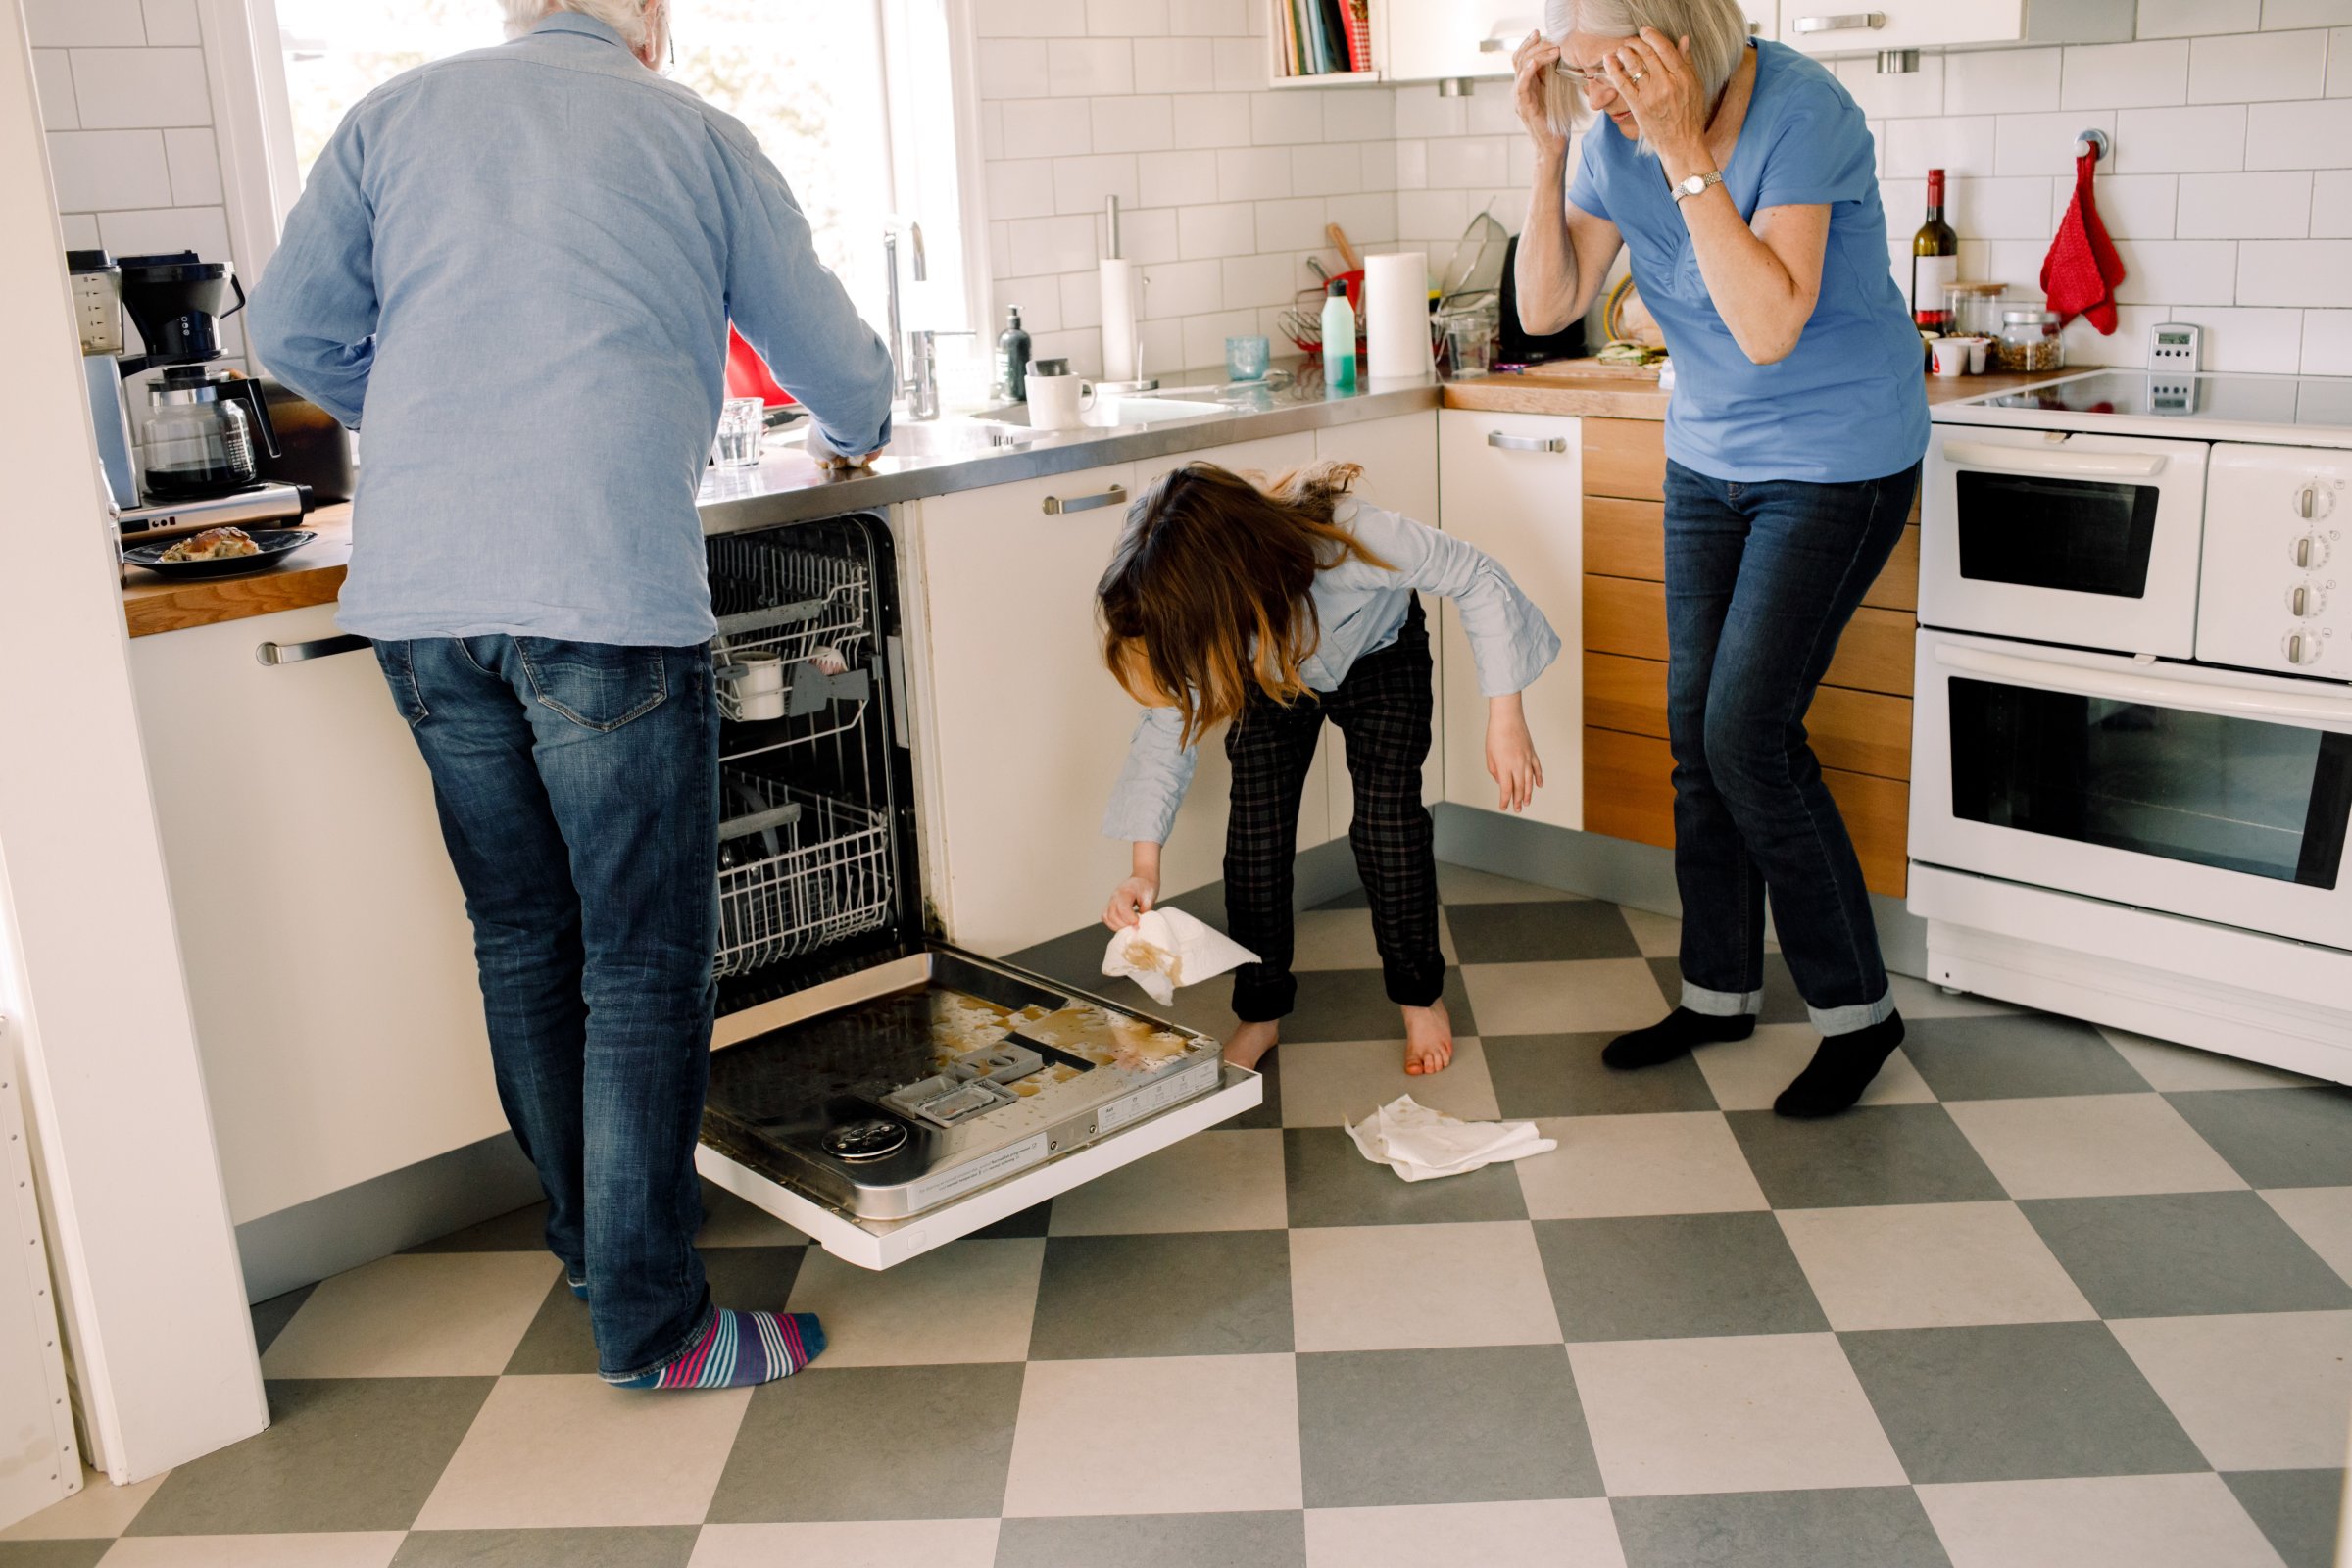 Grandparents standing by girl cleaning dishwasher in kitchen at home